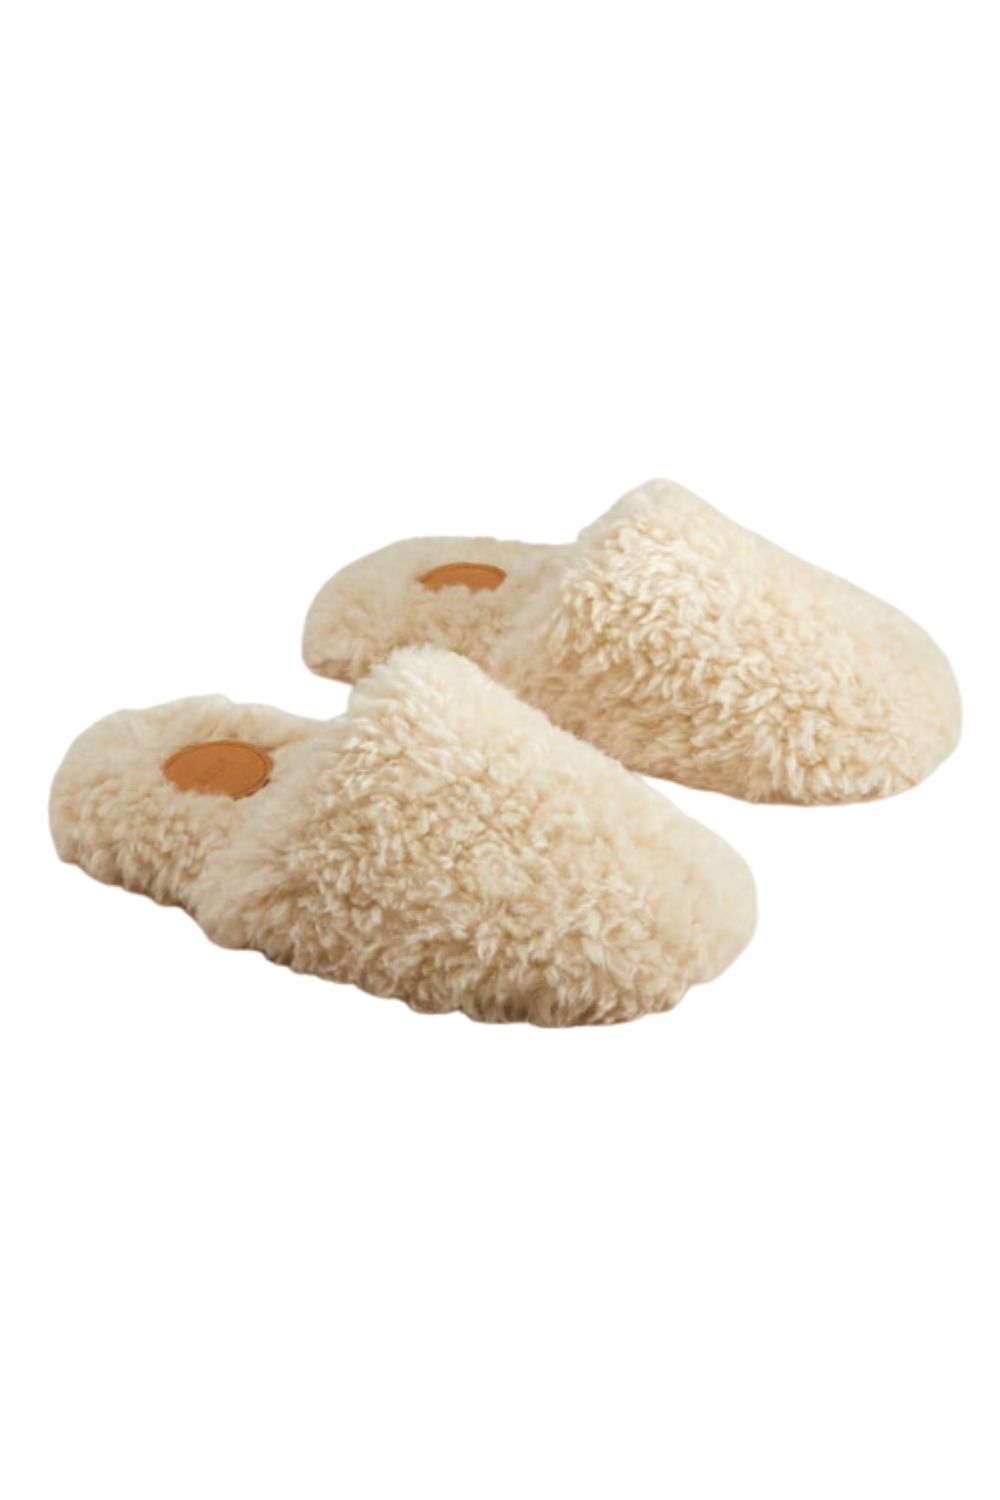 Best slippers for women: From UGG, M&S, The White Company and more ...